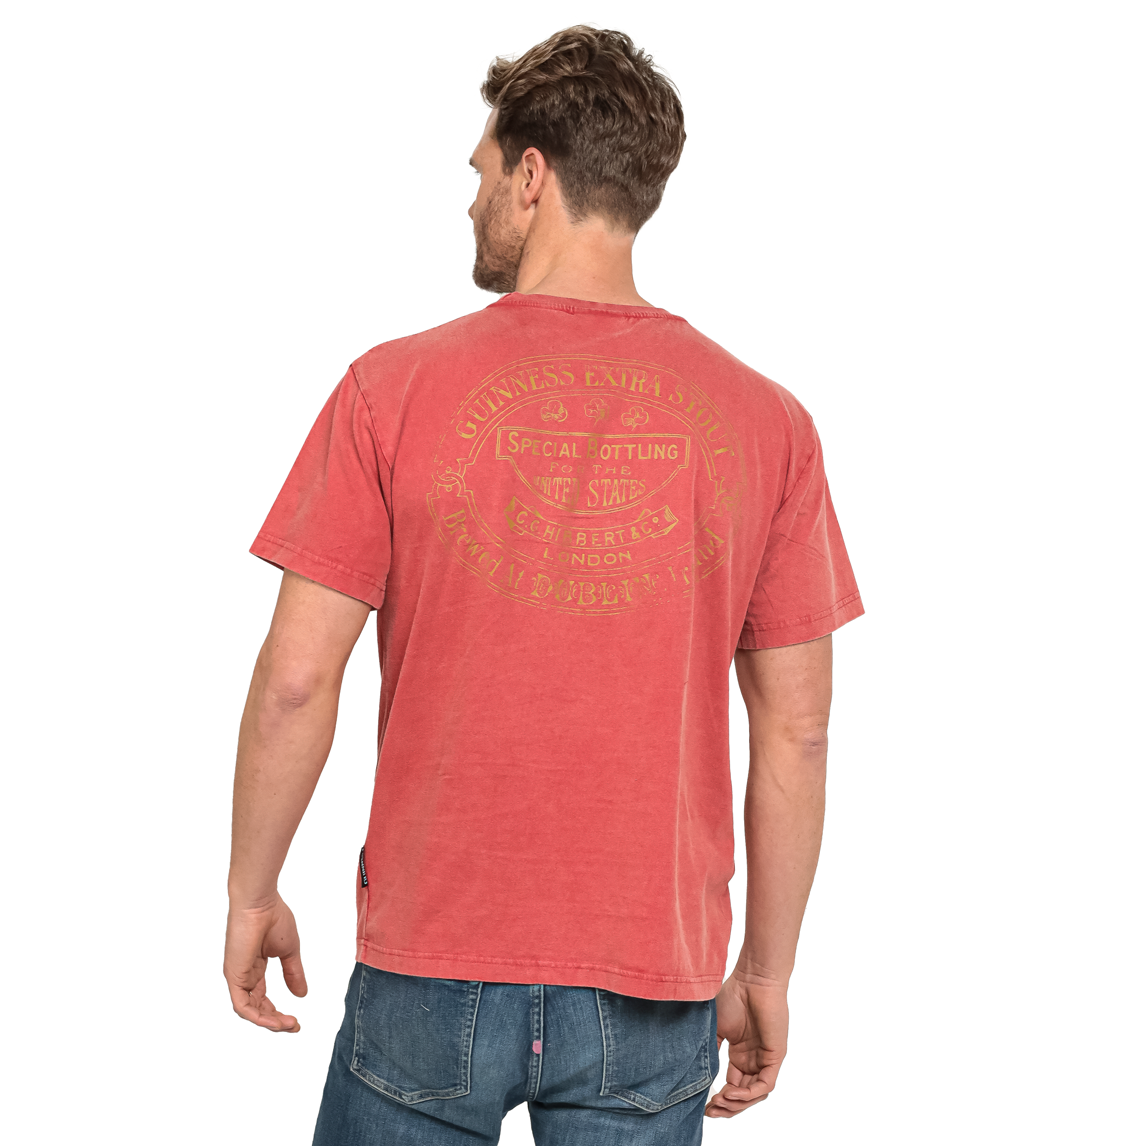 The back of a man wearing a Guinness Premium Harp Red Tee featuring the PREMIUM HARP RED TEE design.